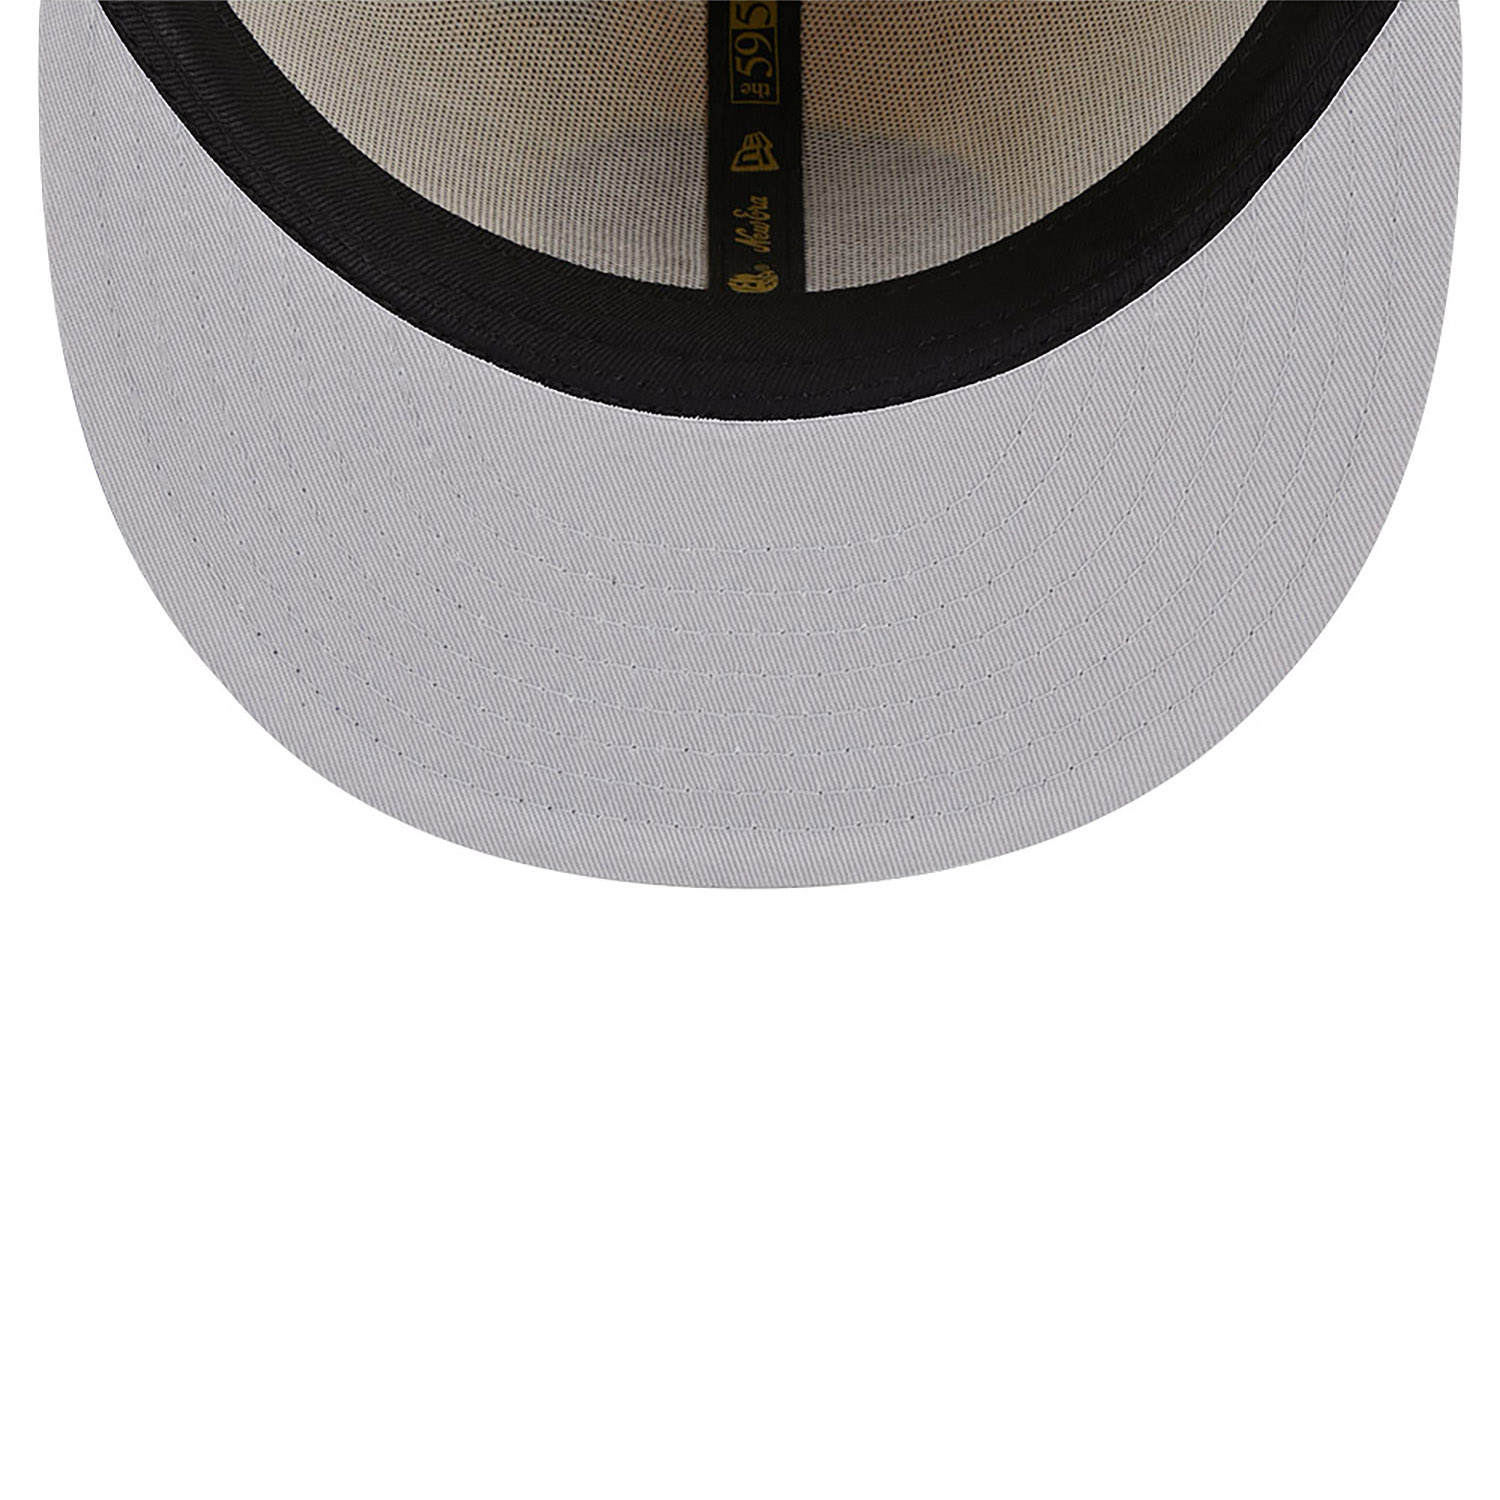 Golden State Warriors 59FIFTY Day Light Beige 59FIFTY Fitted Cap